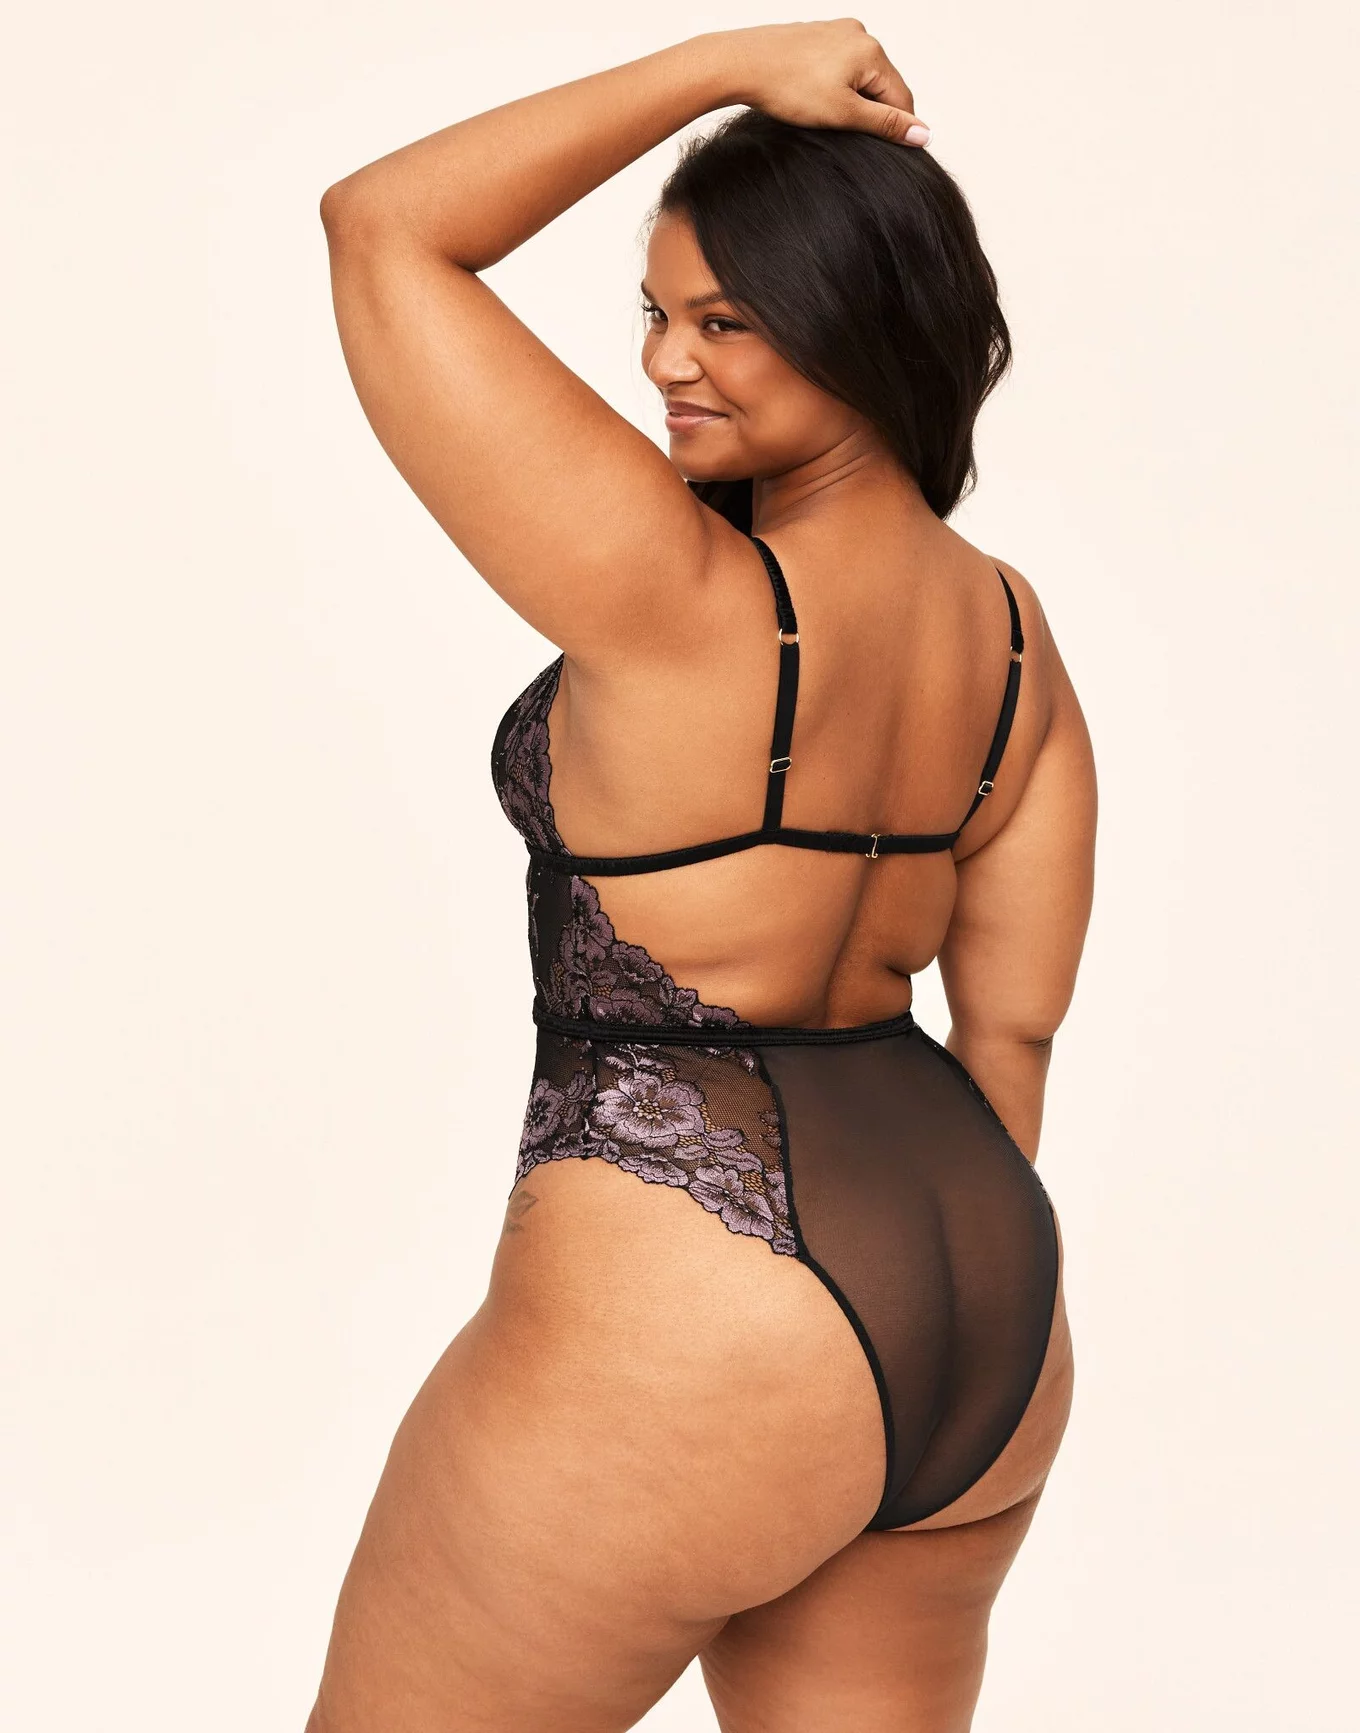 Black Lace Sexy Plus Size Lingerie Bodysuit Teddy One Piece Fitted Strapless